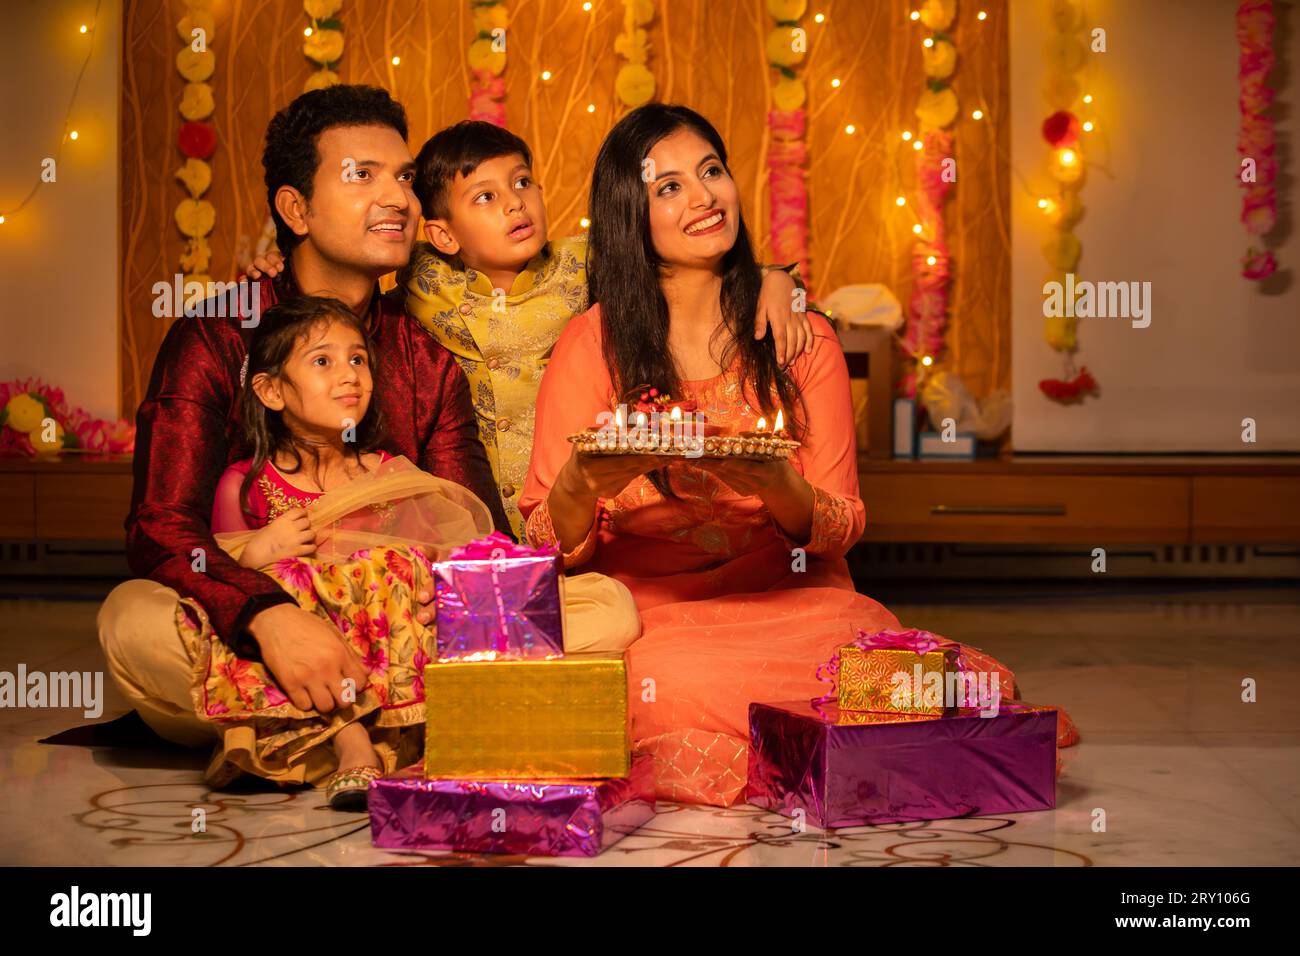 Happy young Indian family in traditional dress with lots of gifts around sitting on floor celebrating diwali festival at home. Stock Photo